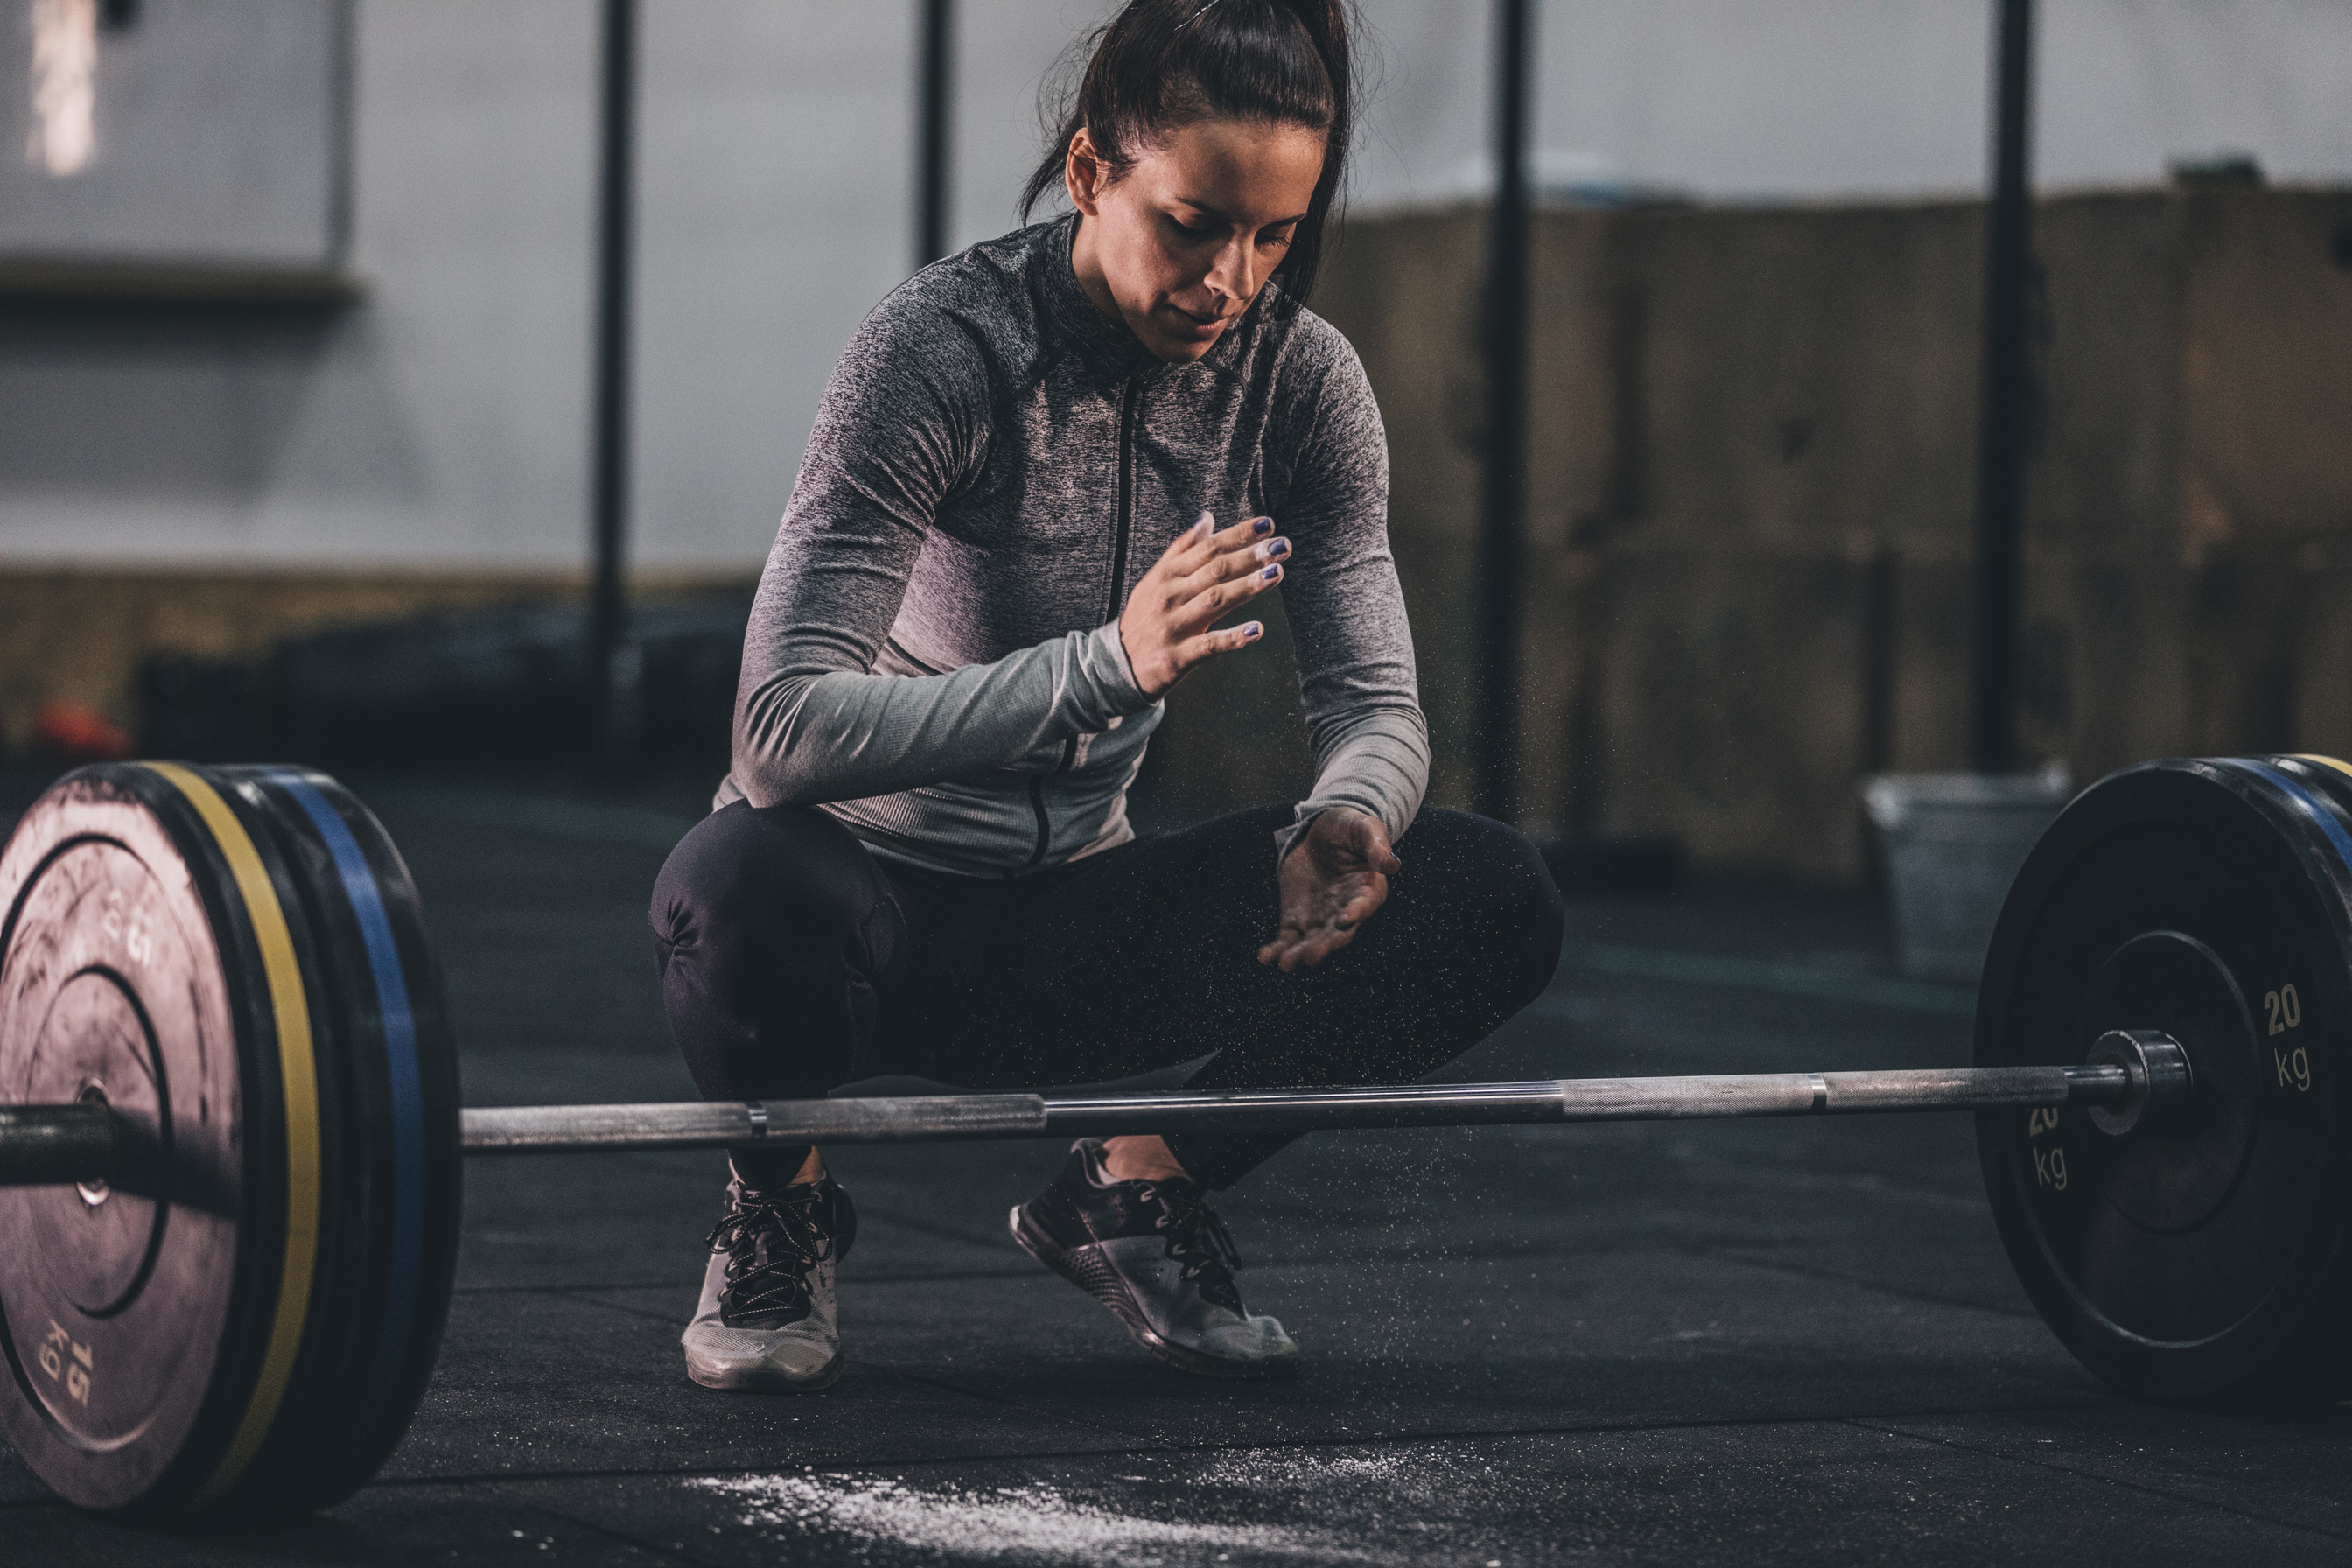 Woman getting ready for deadlifting